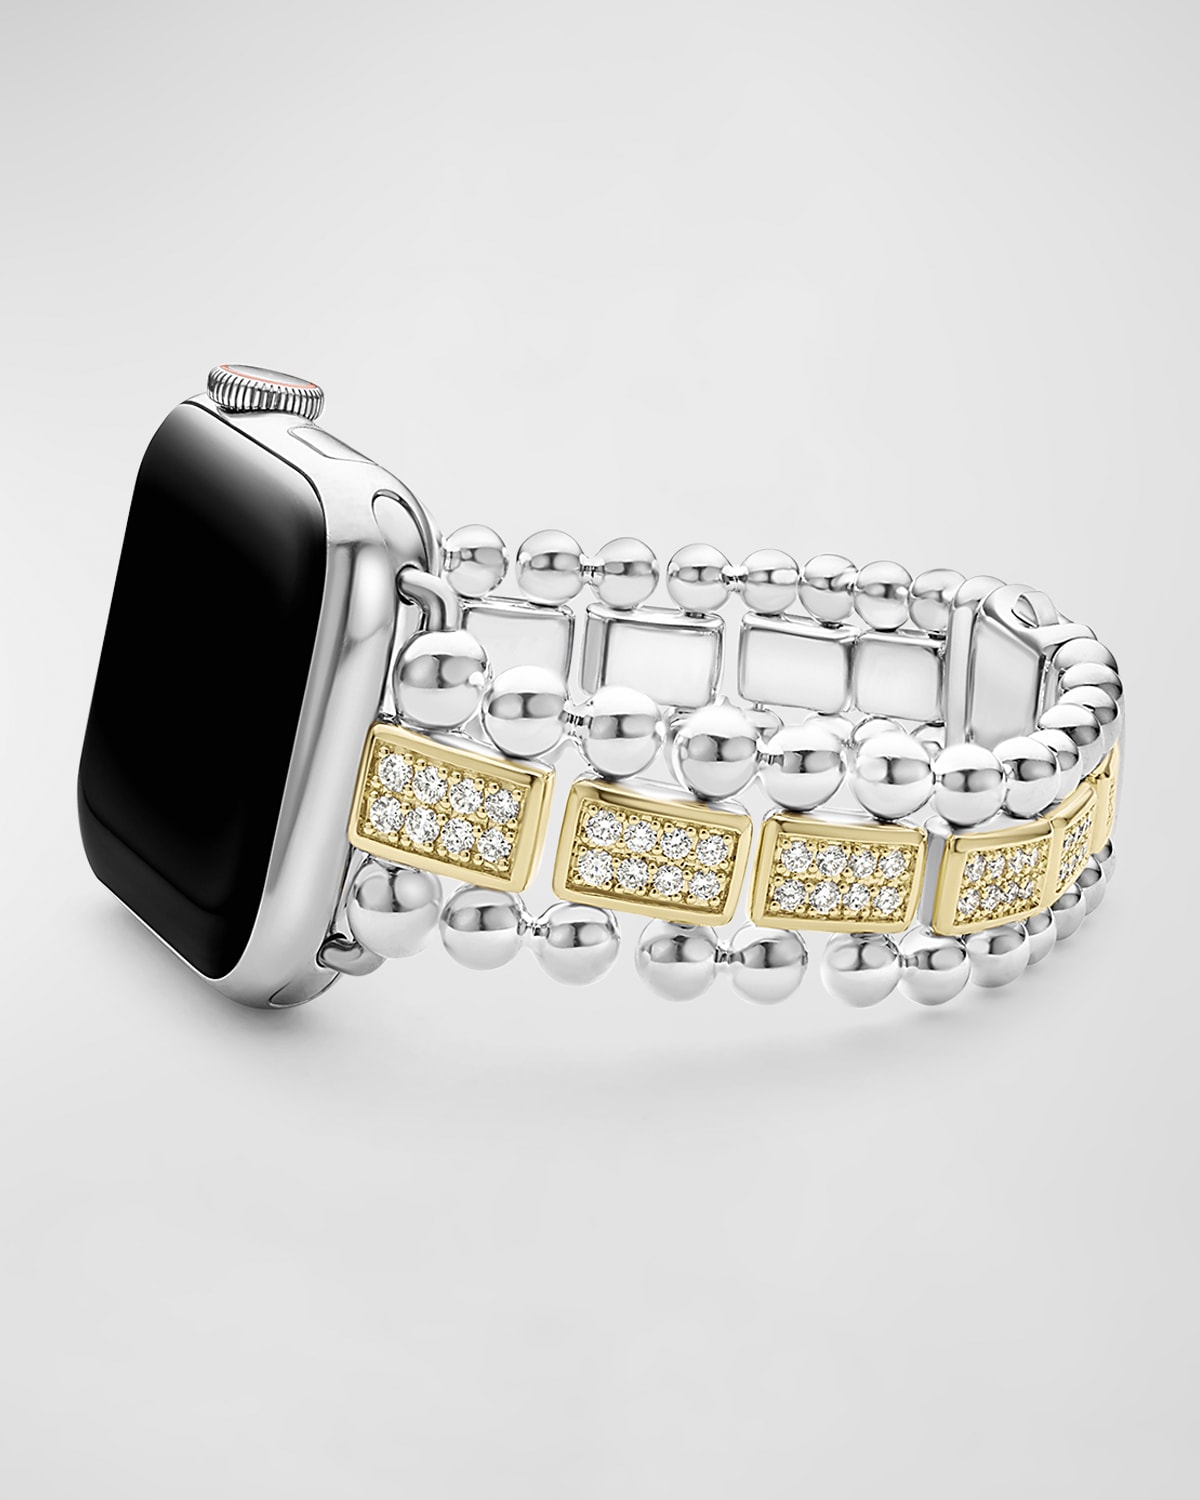 LAGOS SMART CAVIAR TWO-TONE STERLING SILVER AND 18K YELLOW GOLD FULL DIAMOND APPLE WATCH BRACELET, 38-45MM